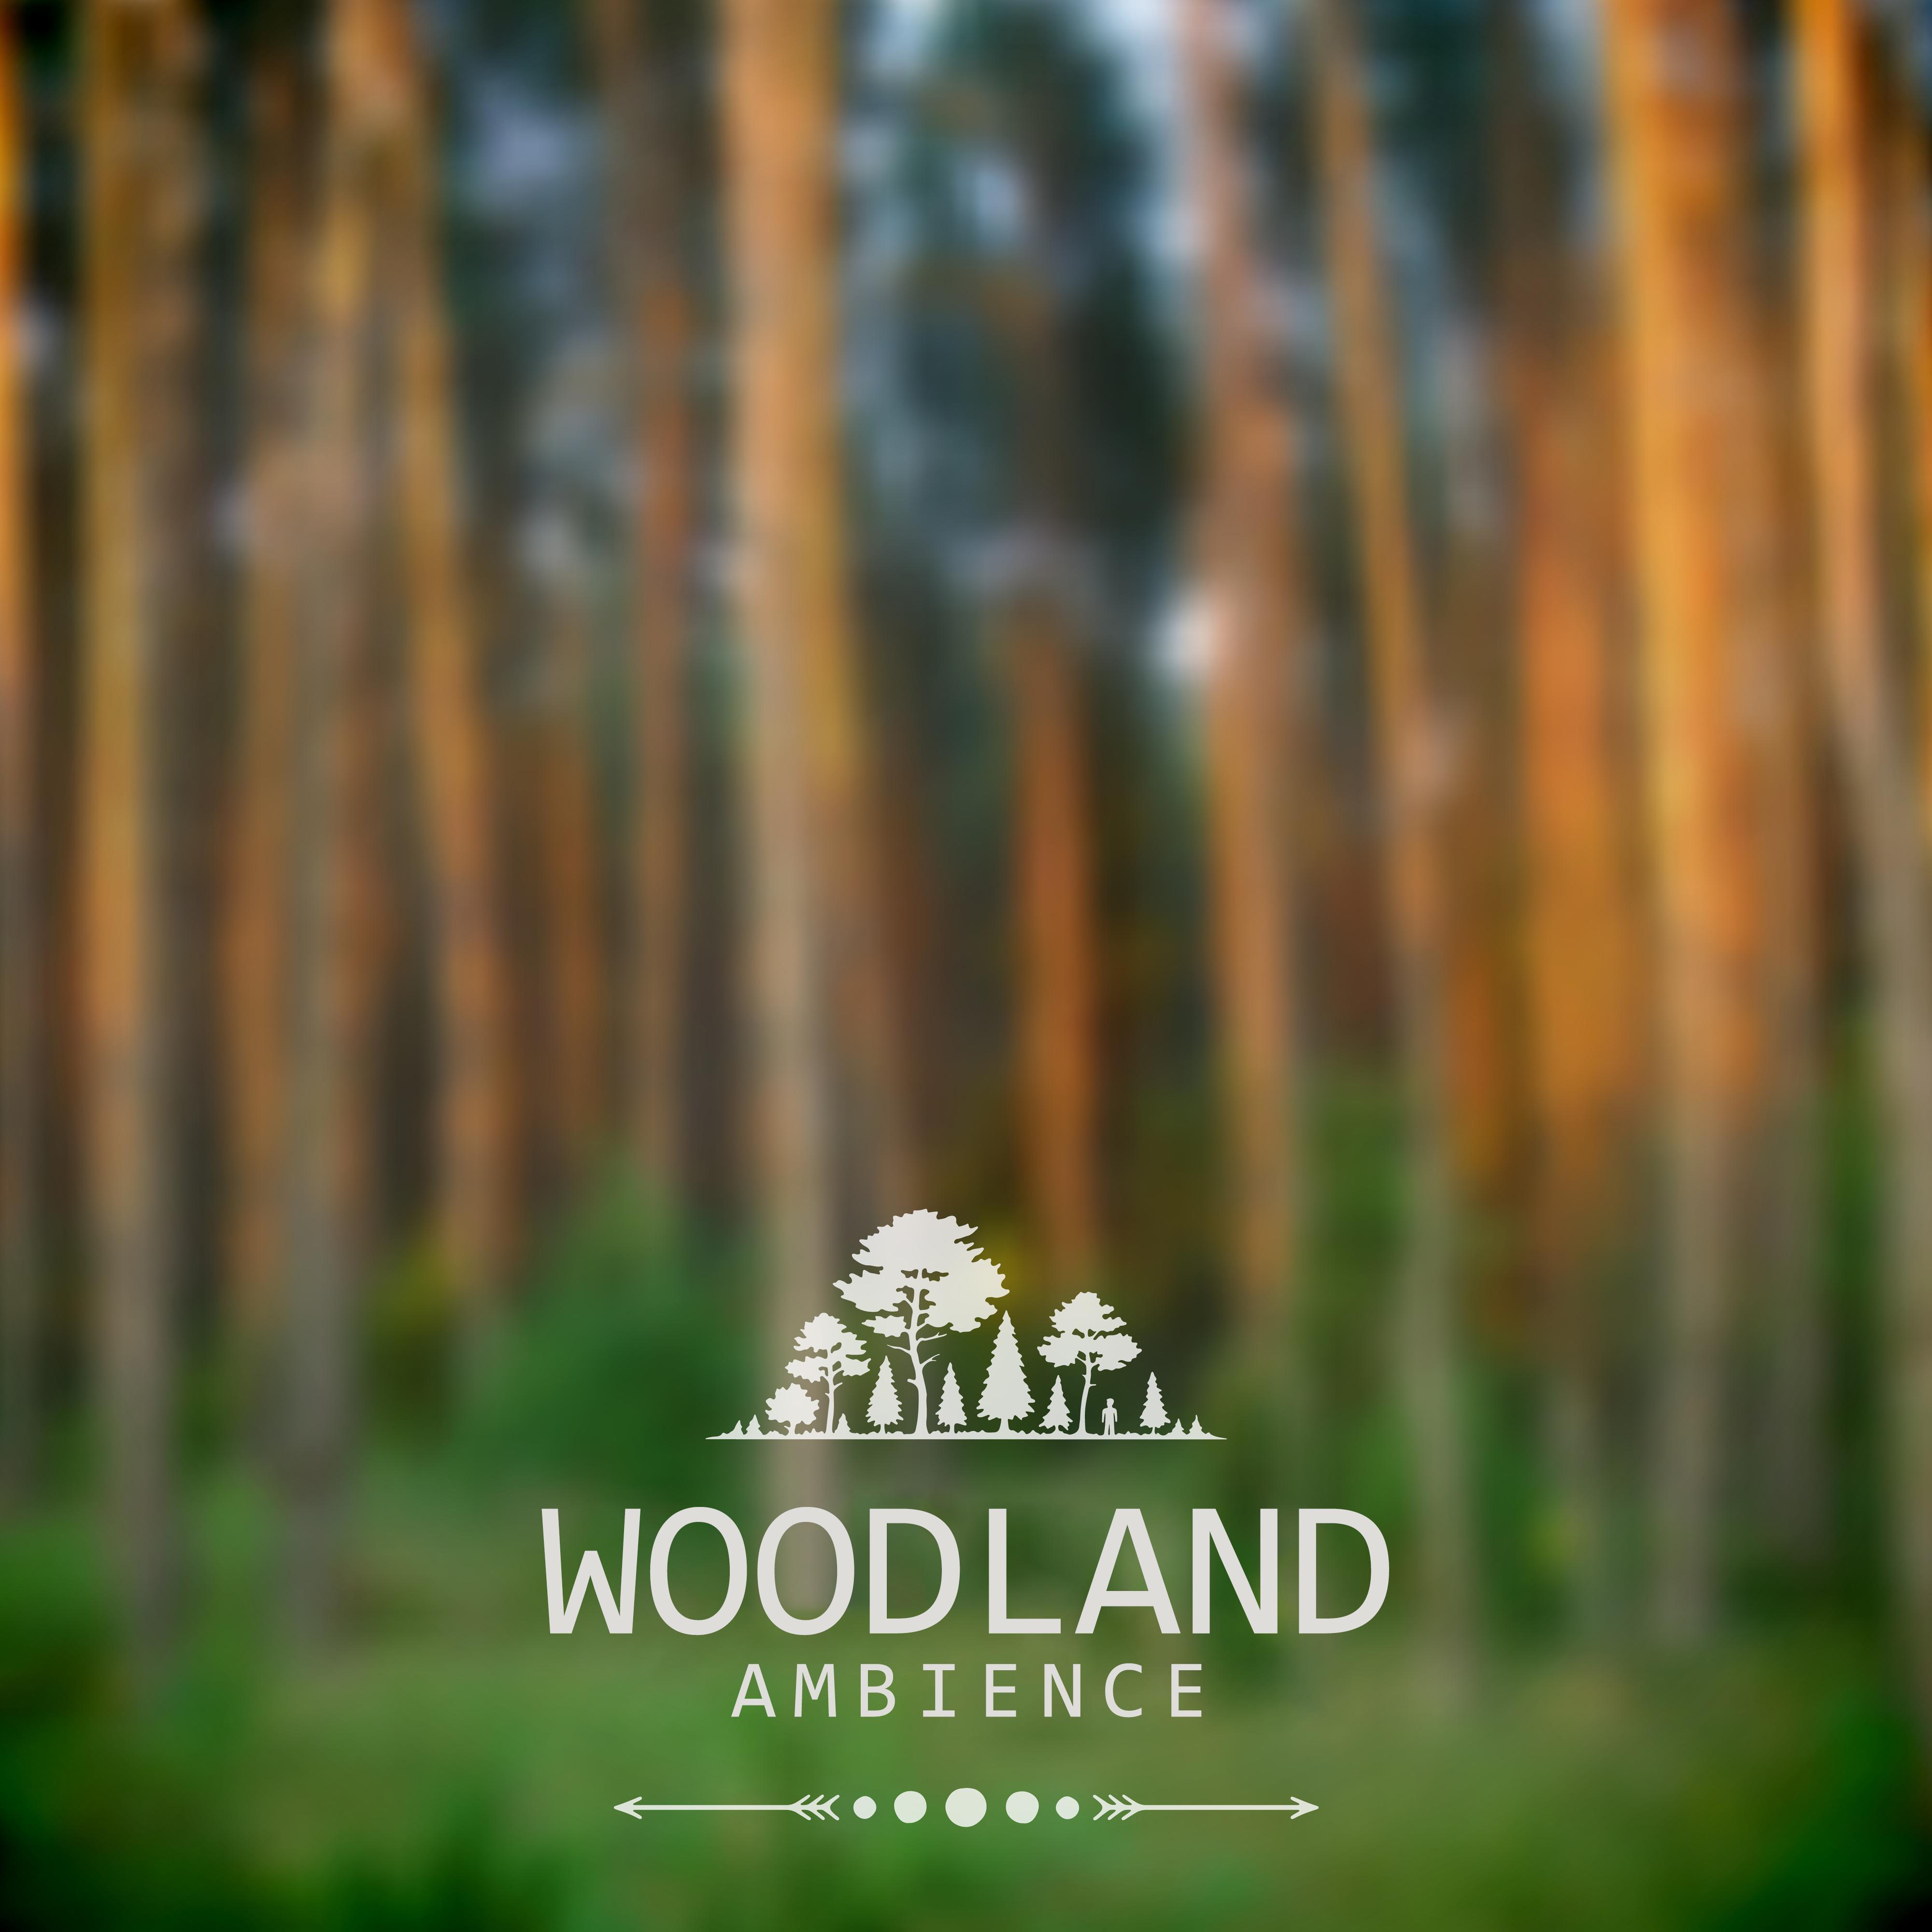 Woodland Ambience – Relaxing Sounds of Nature, Singing Forest Birds, Music for Moments of Relaxation and Rest, Gentle Piano Melodies in the Background of Nature